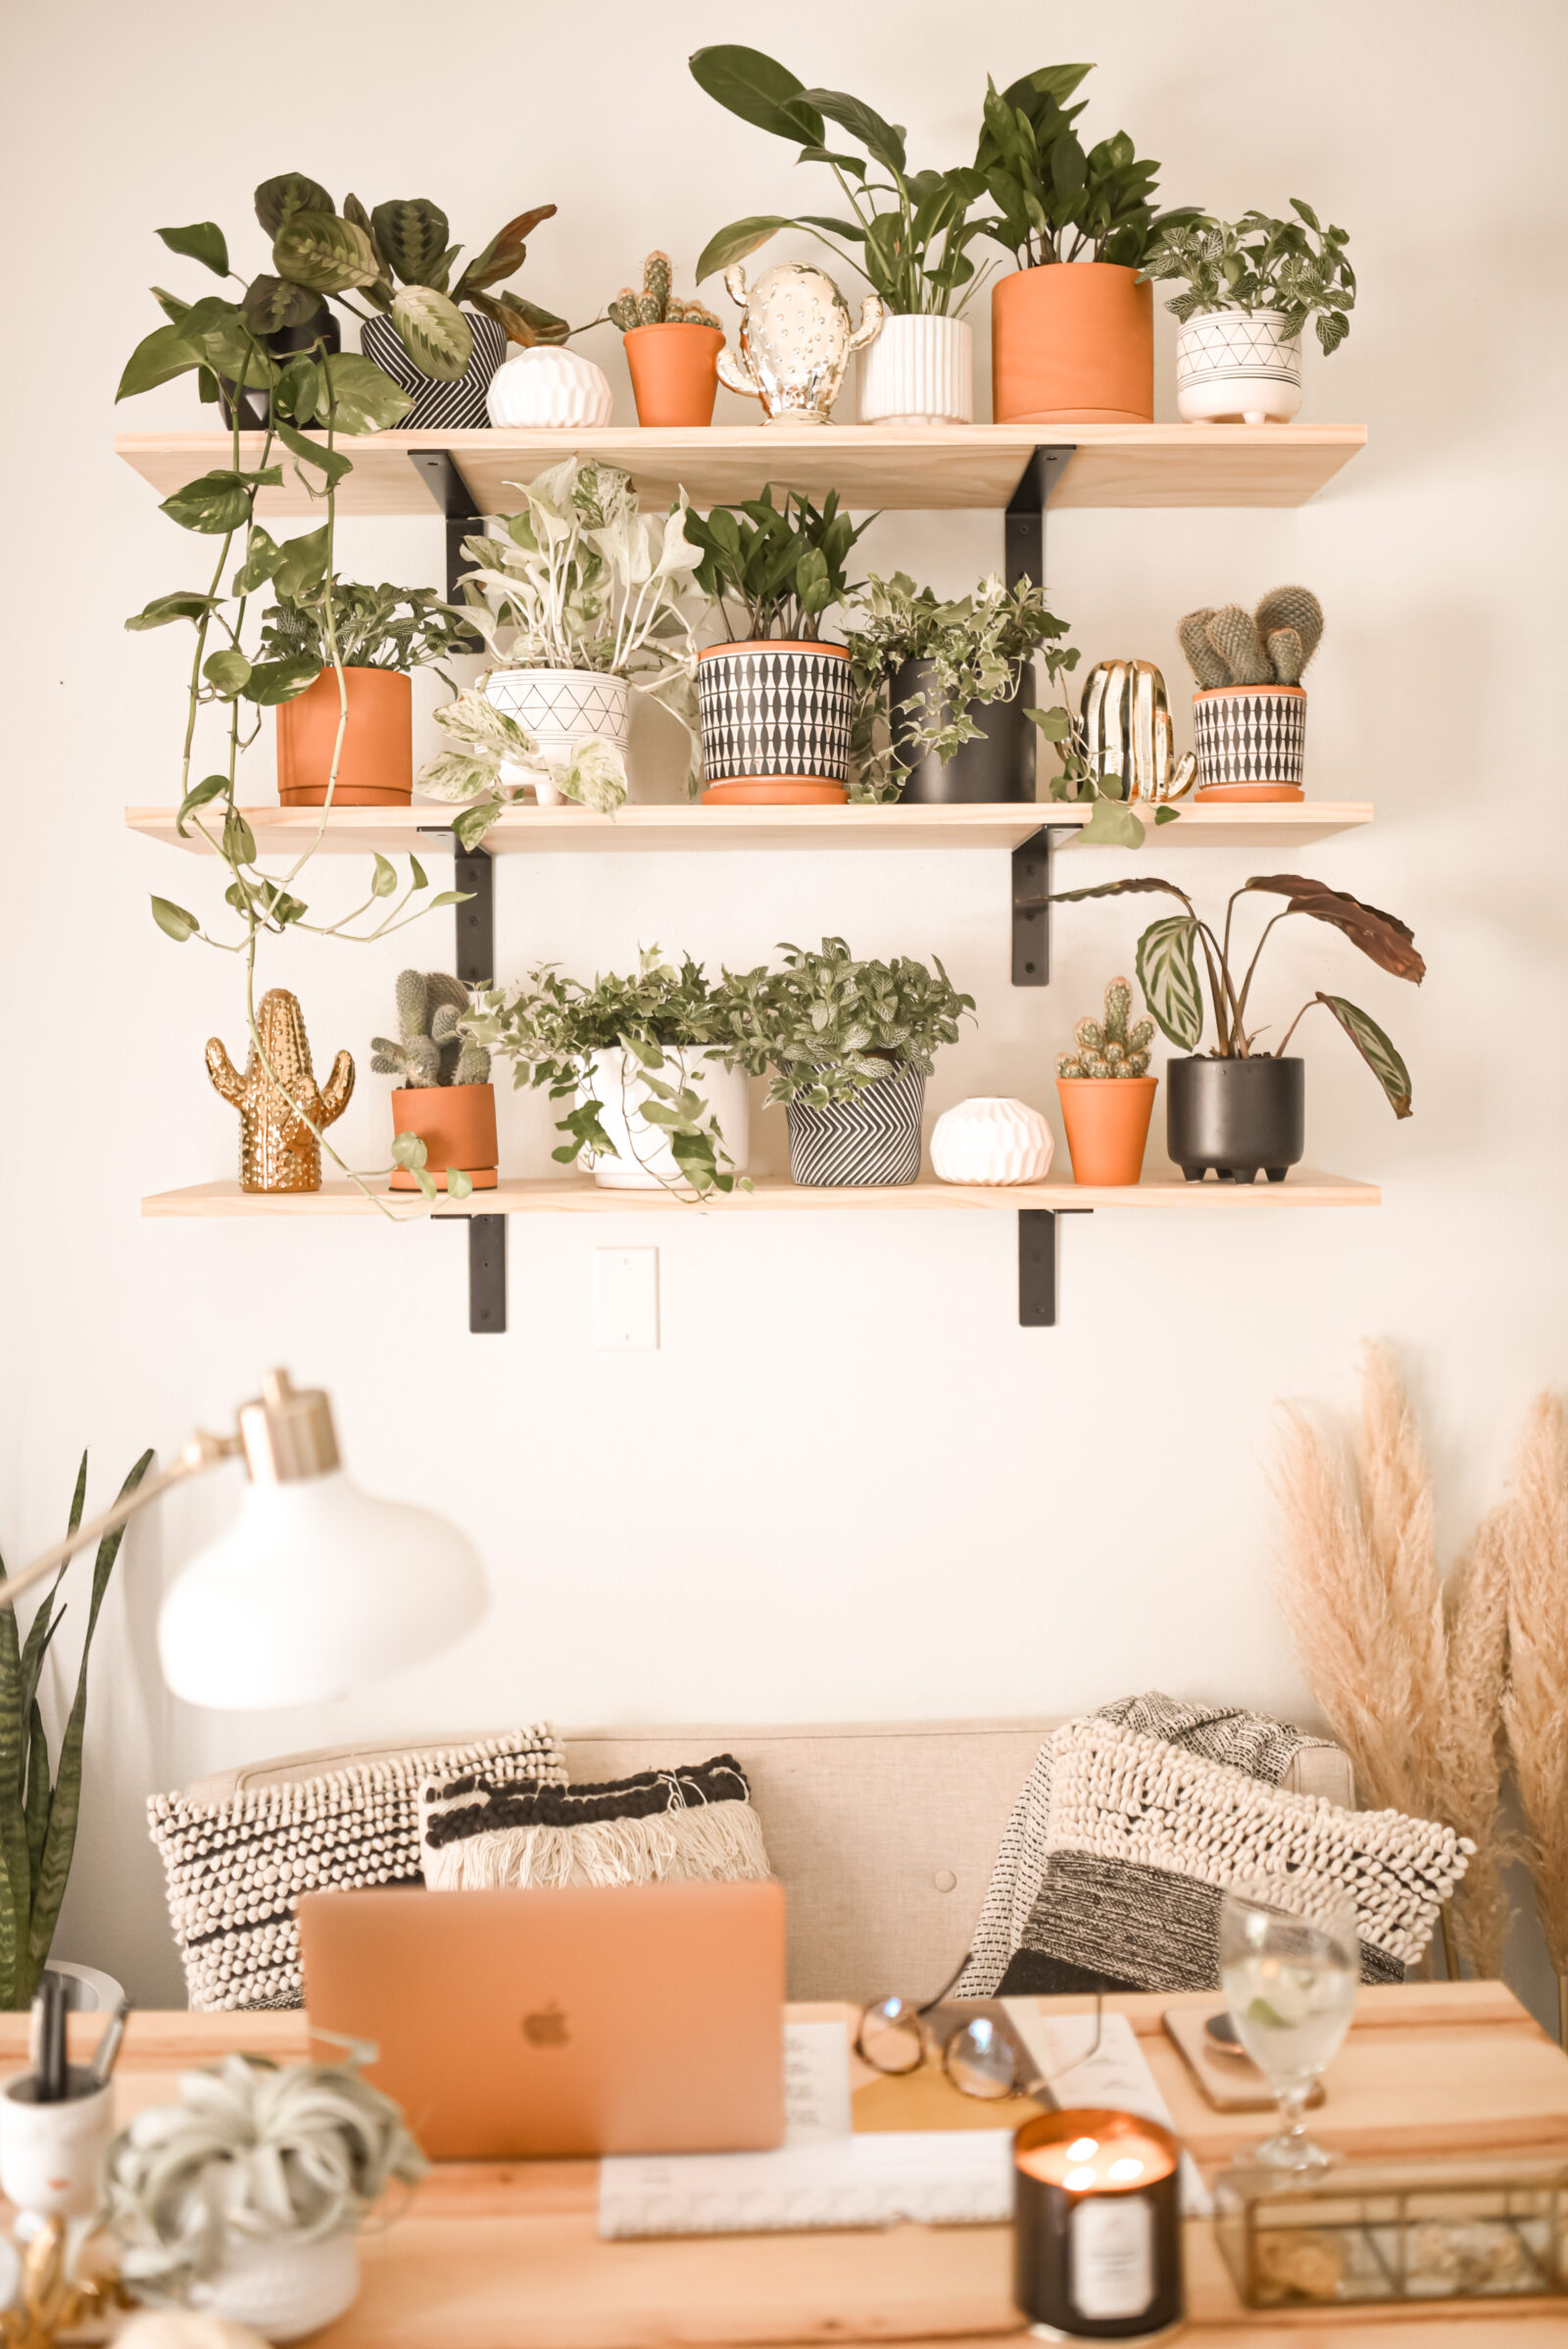 My boho style office on a budget. Amazon home finds from plants to baskets to rugs.